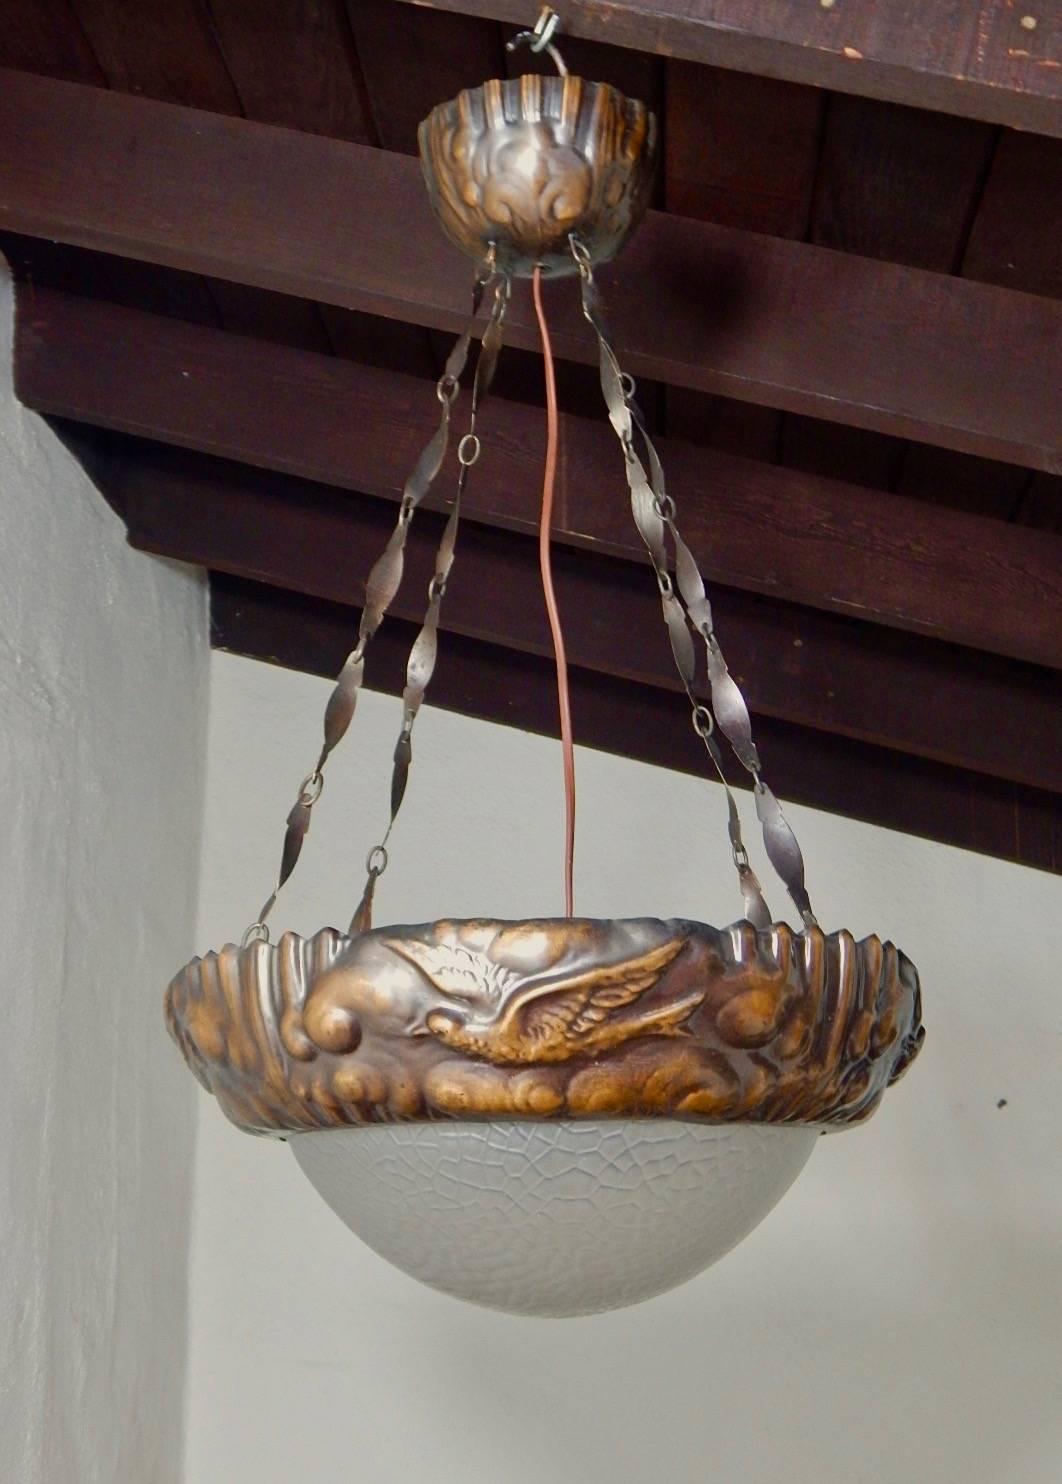 20th Century Swedish Arts & Crafts Hammered Copper Hanging Fixture #19, circa 1910 For Sale